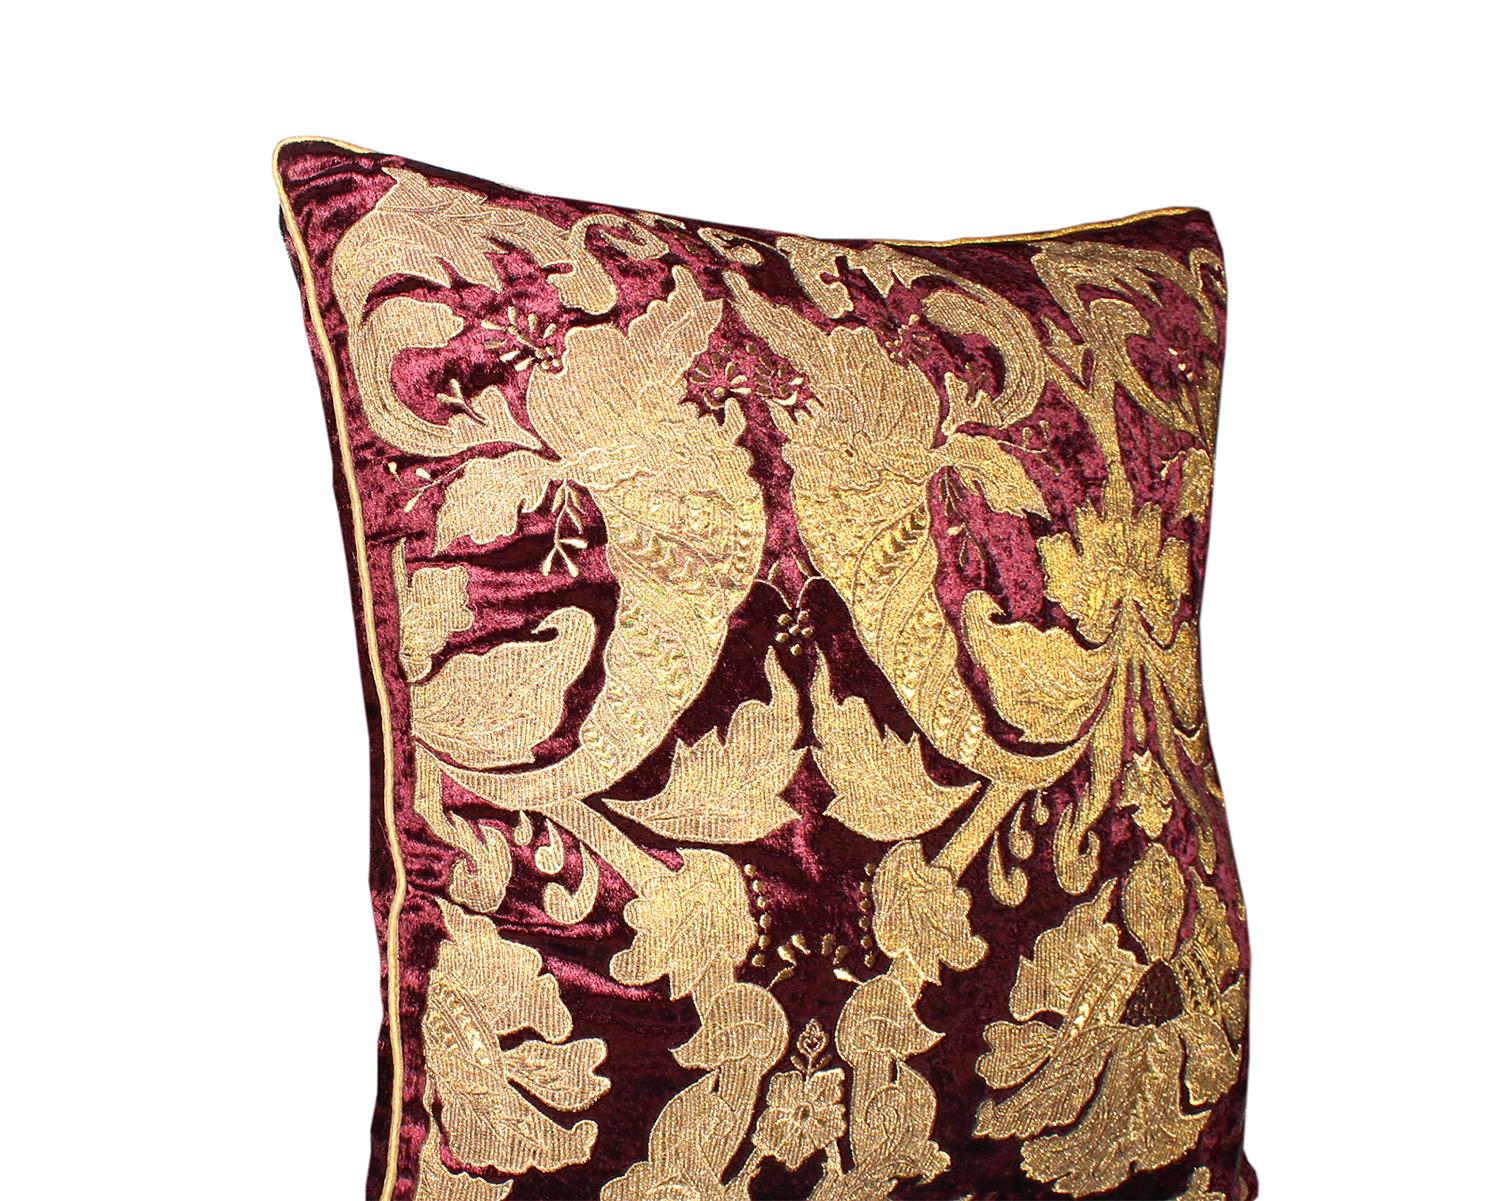 Velvet throw pillow with embroidery

Measures: 24